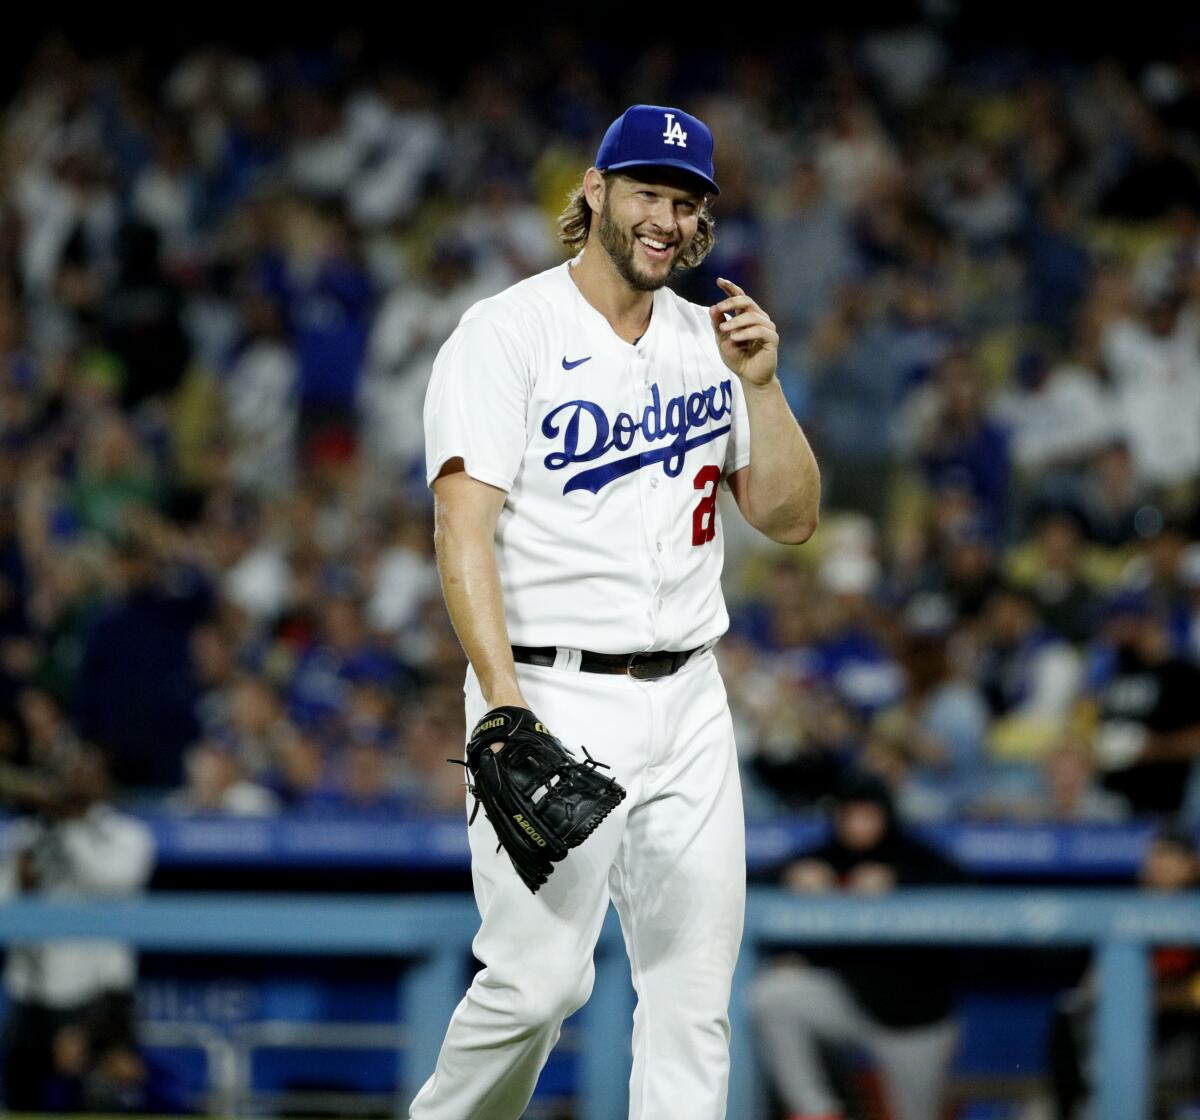 Dodgers pitcher Clayton Kershaw reacts after left fielder David Peralta makes a diving catch.